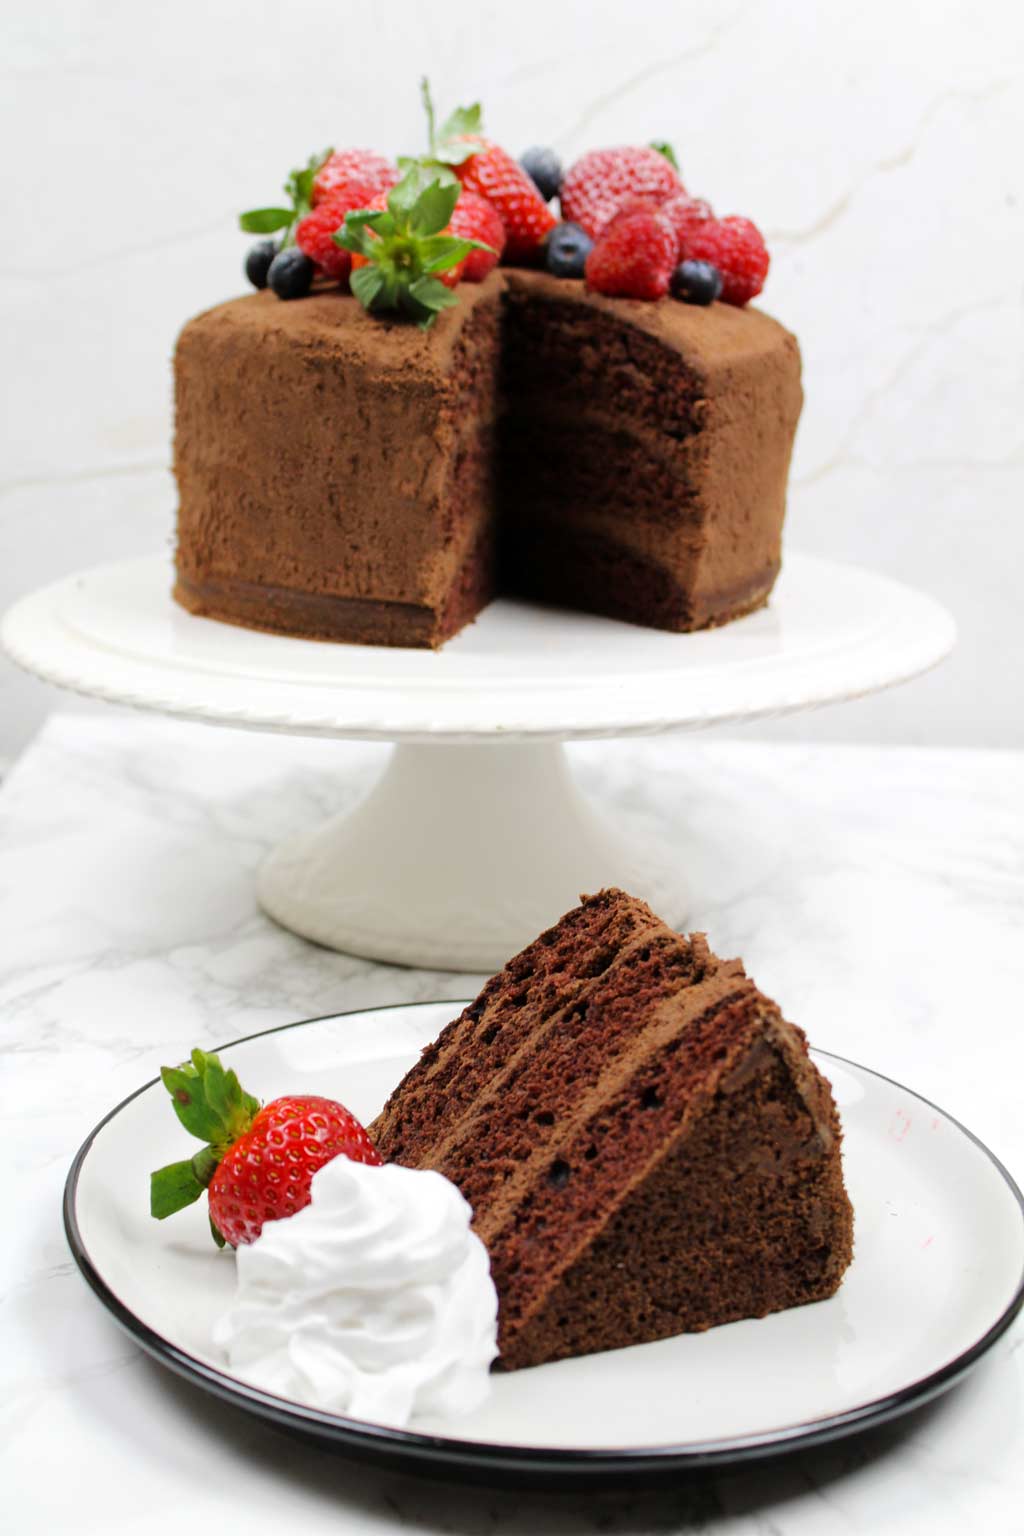 slice of vegan chocolate cake on a plate with whipped cream and a strawberry beside it. The rest of the cake is on a cake stand in the background